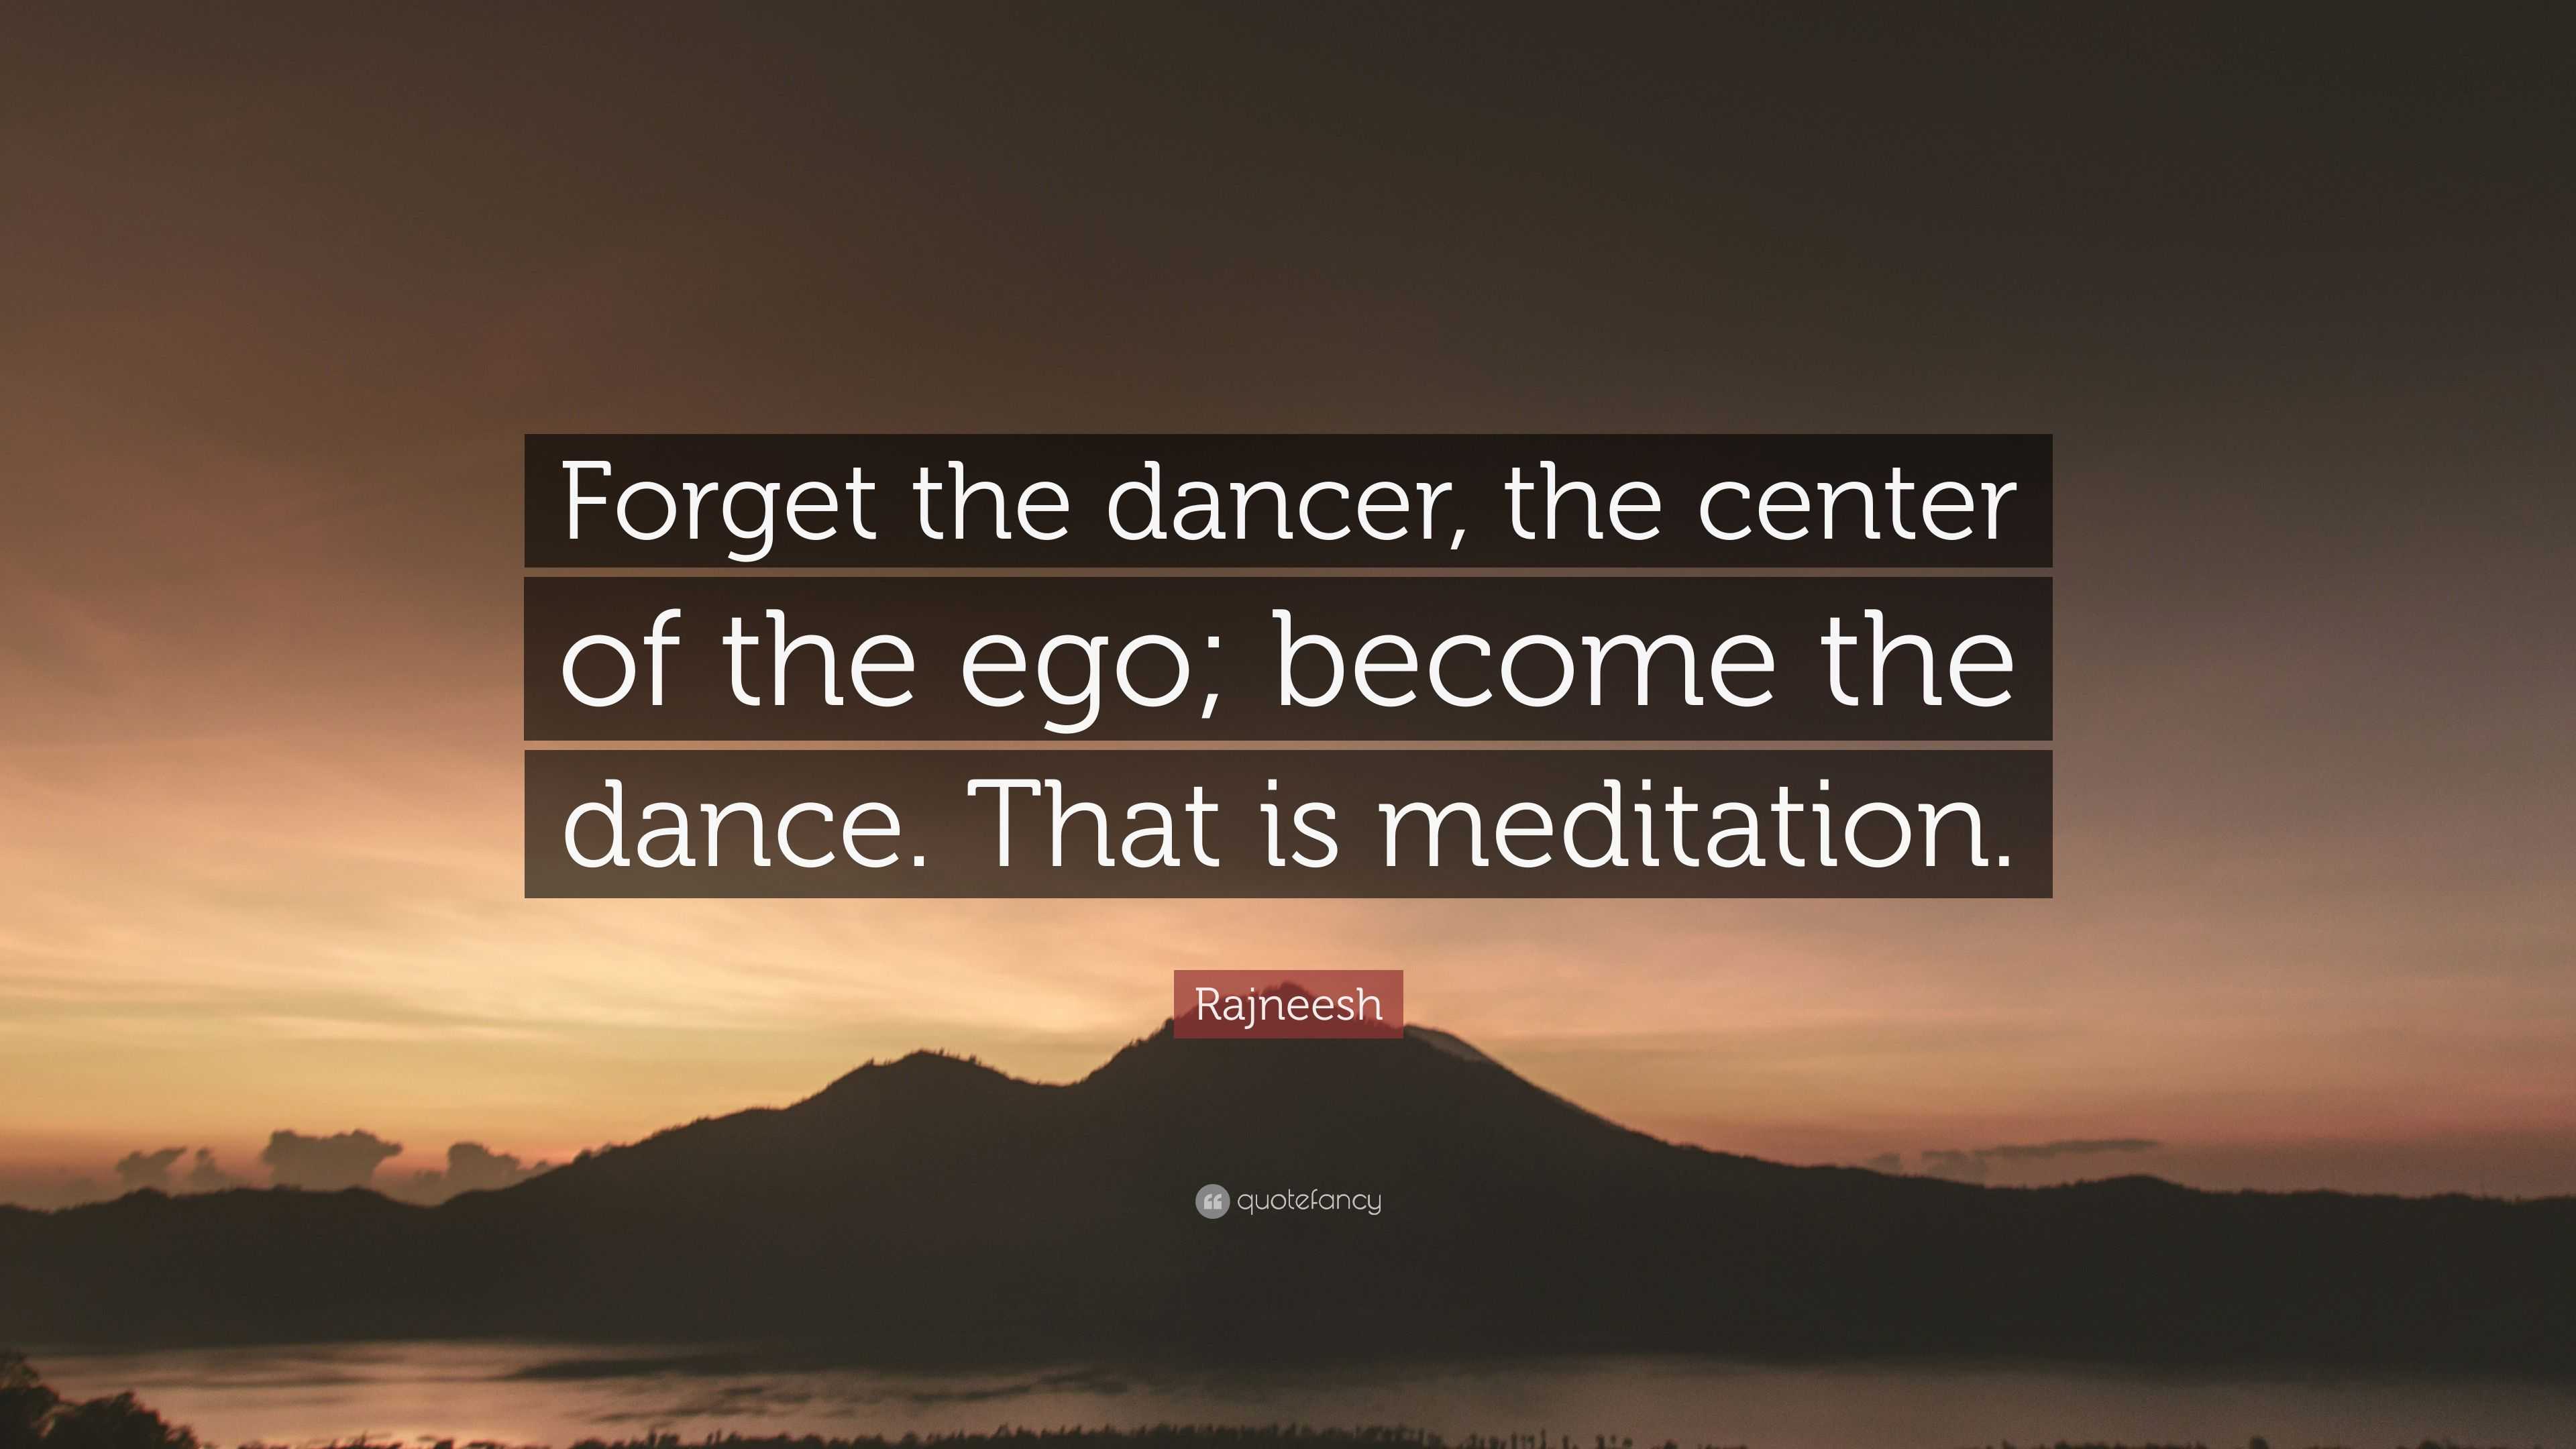 Rajneesh Quote: “Forget the dancer, the center of the ego; become